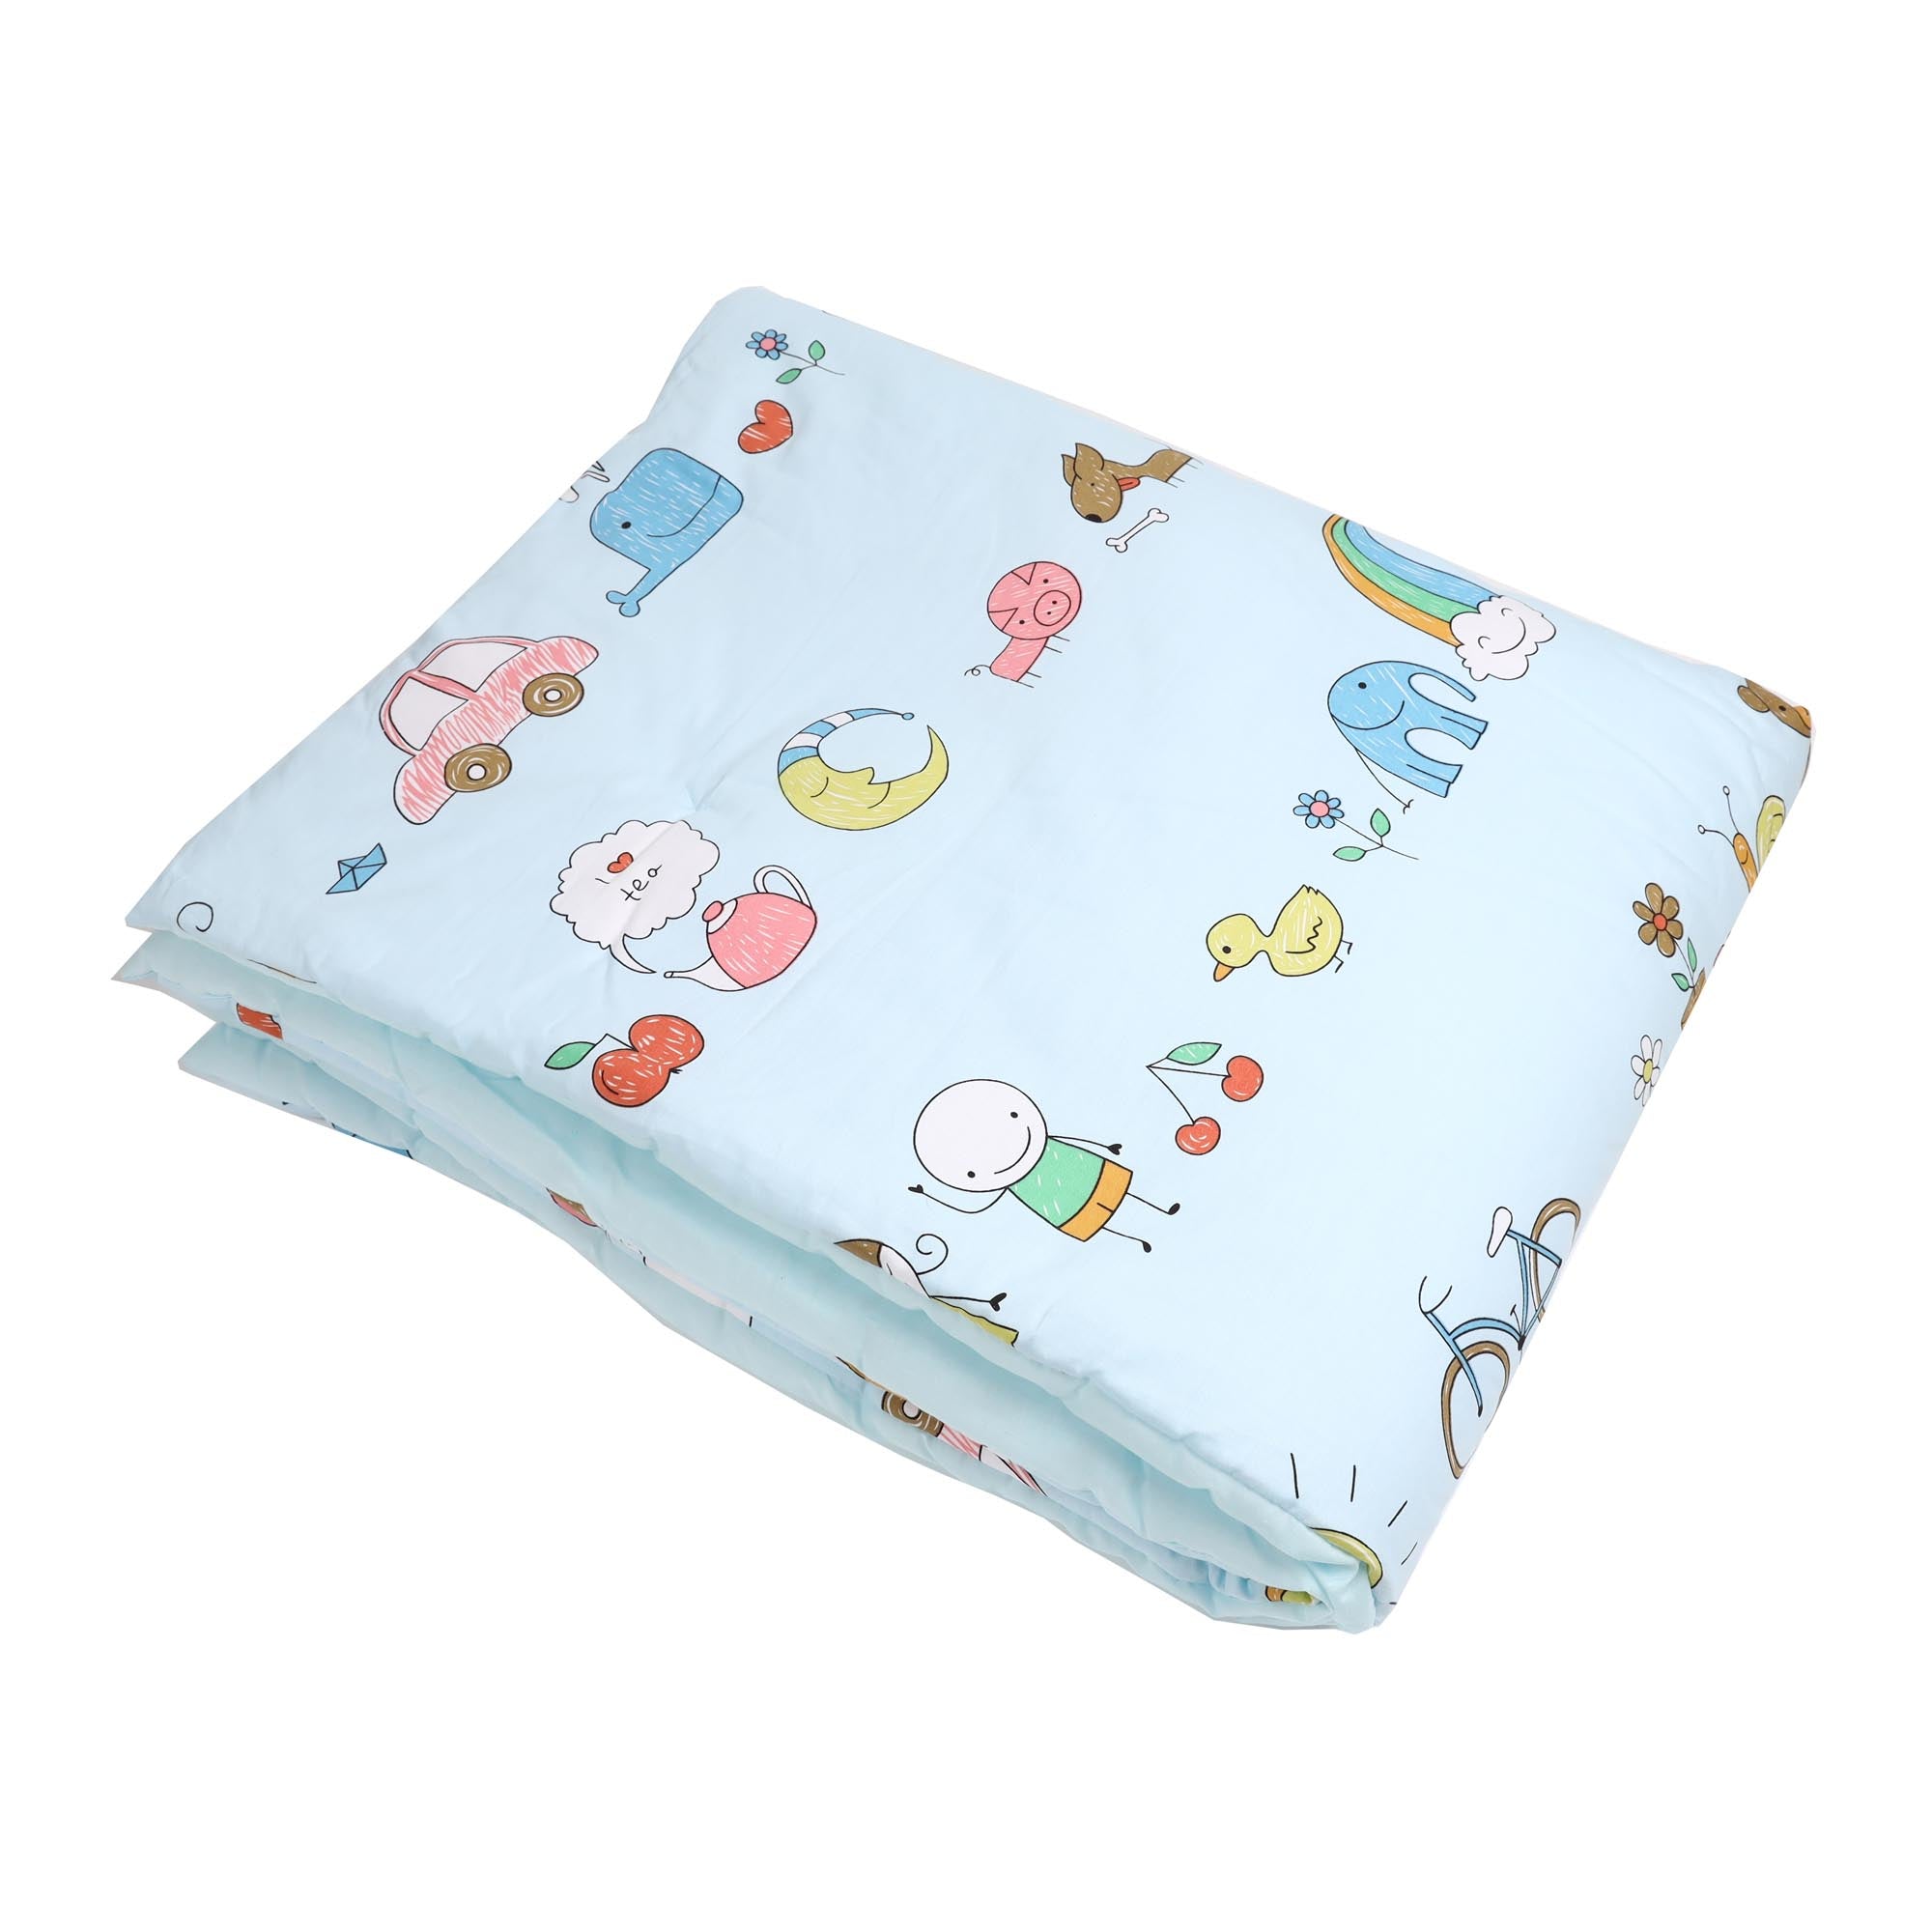 Baby Boys 5pc Quilted Bedding Set - Blue